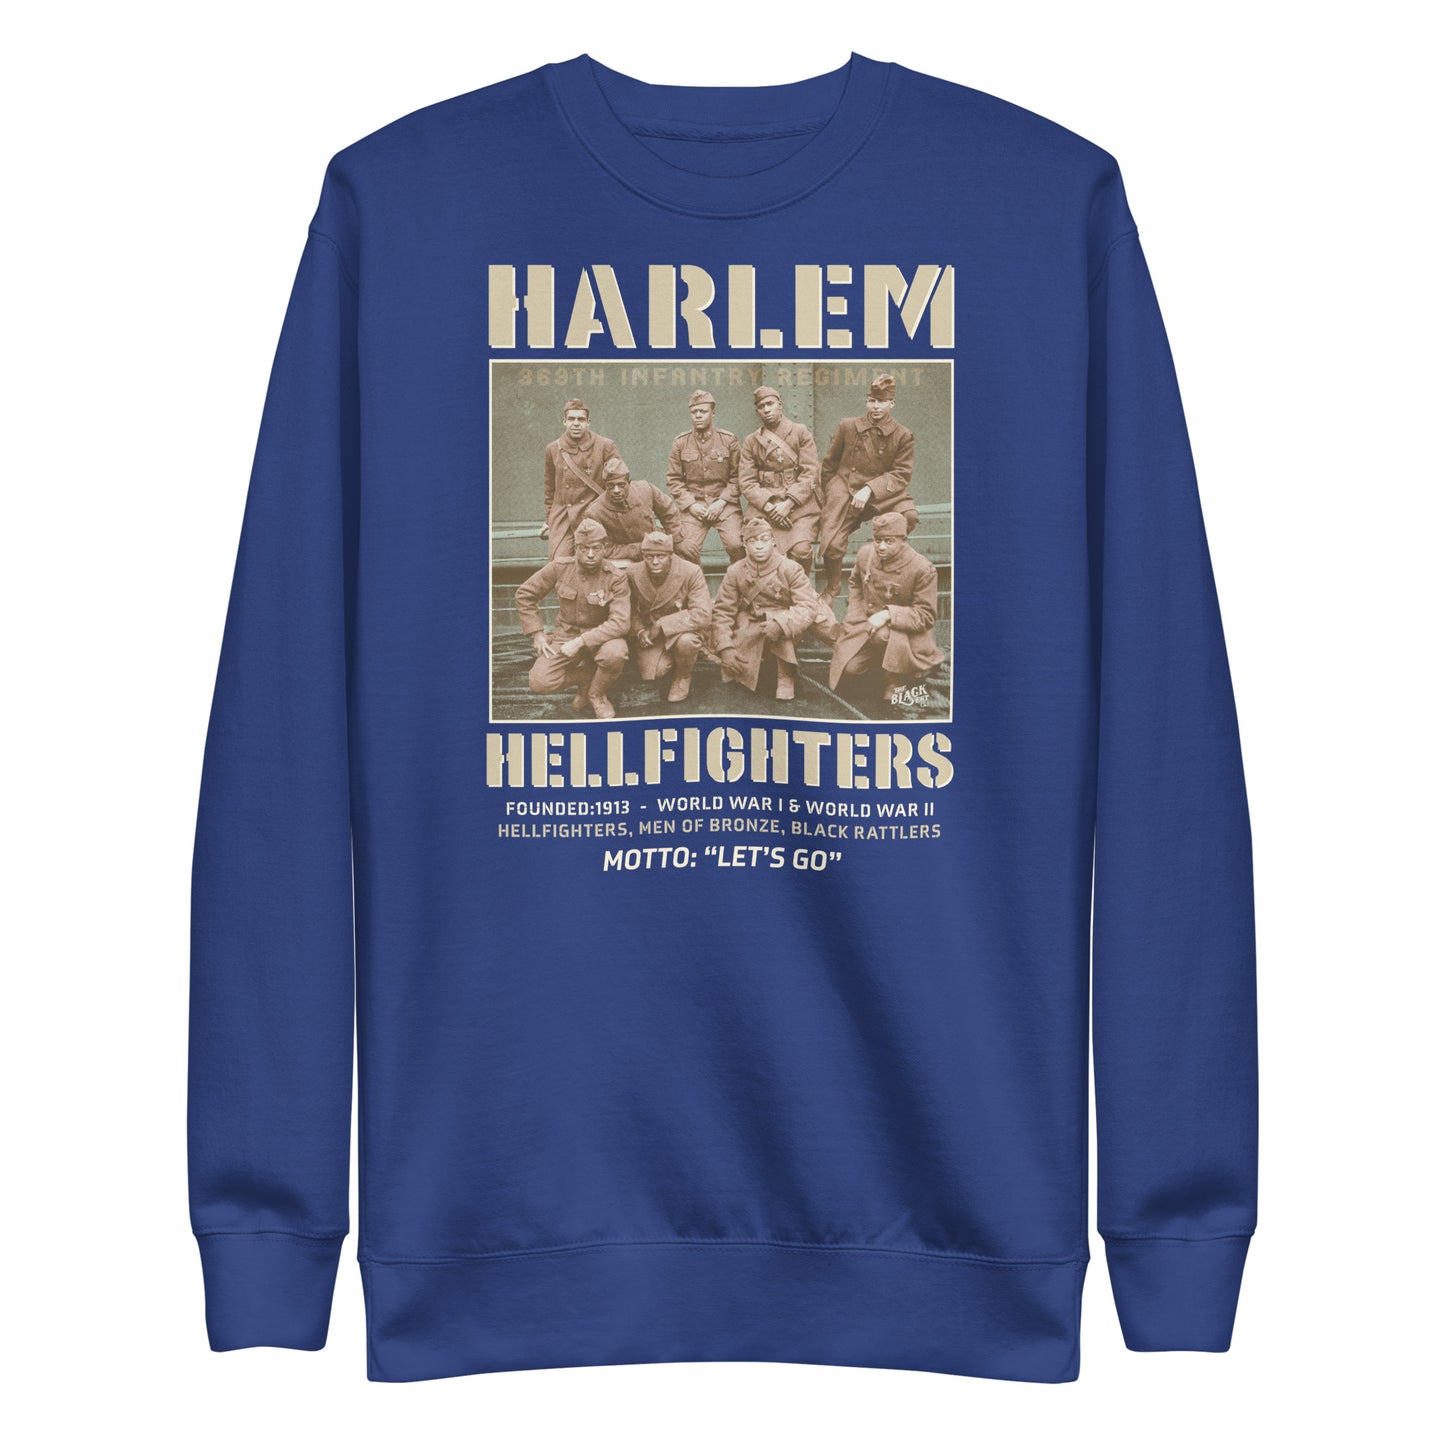 royal blue premium sweatshirt with a vintage image of wwi soldiers with text that reads harlem hellfighters